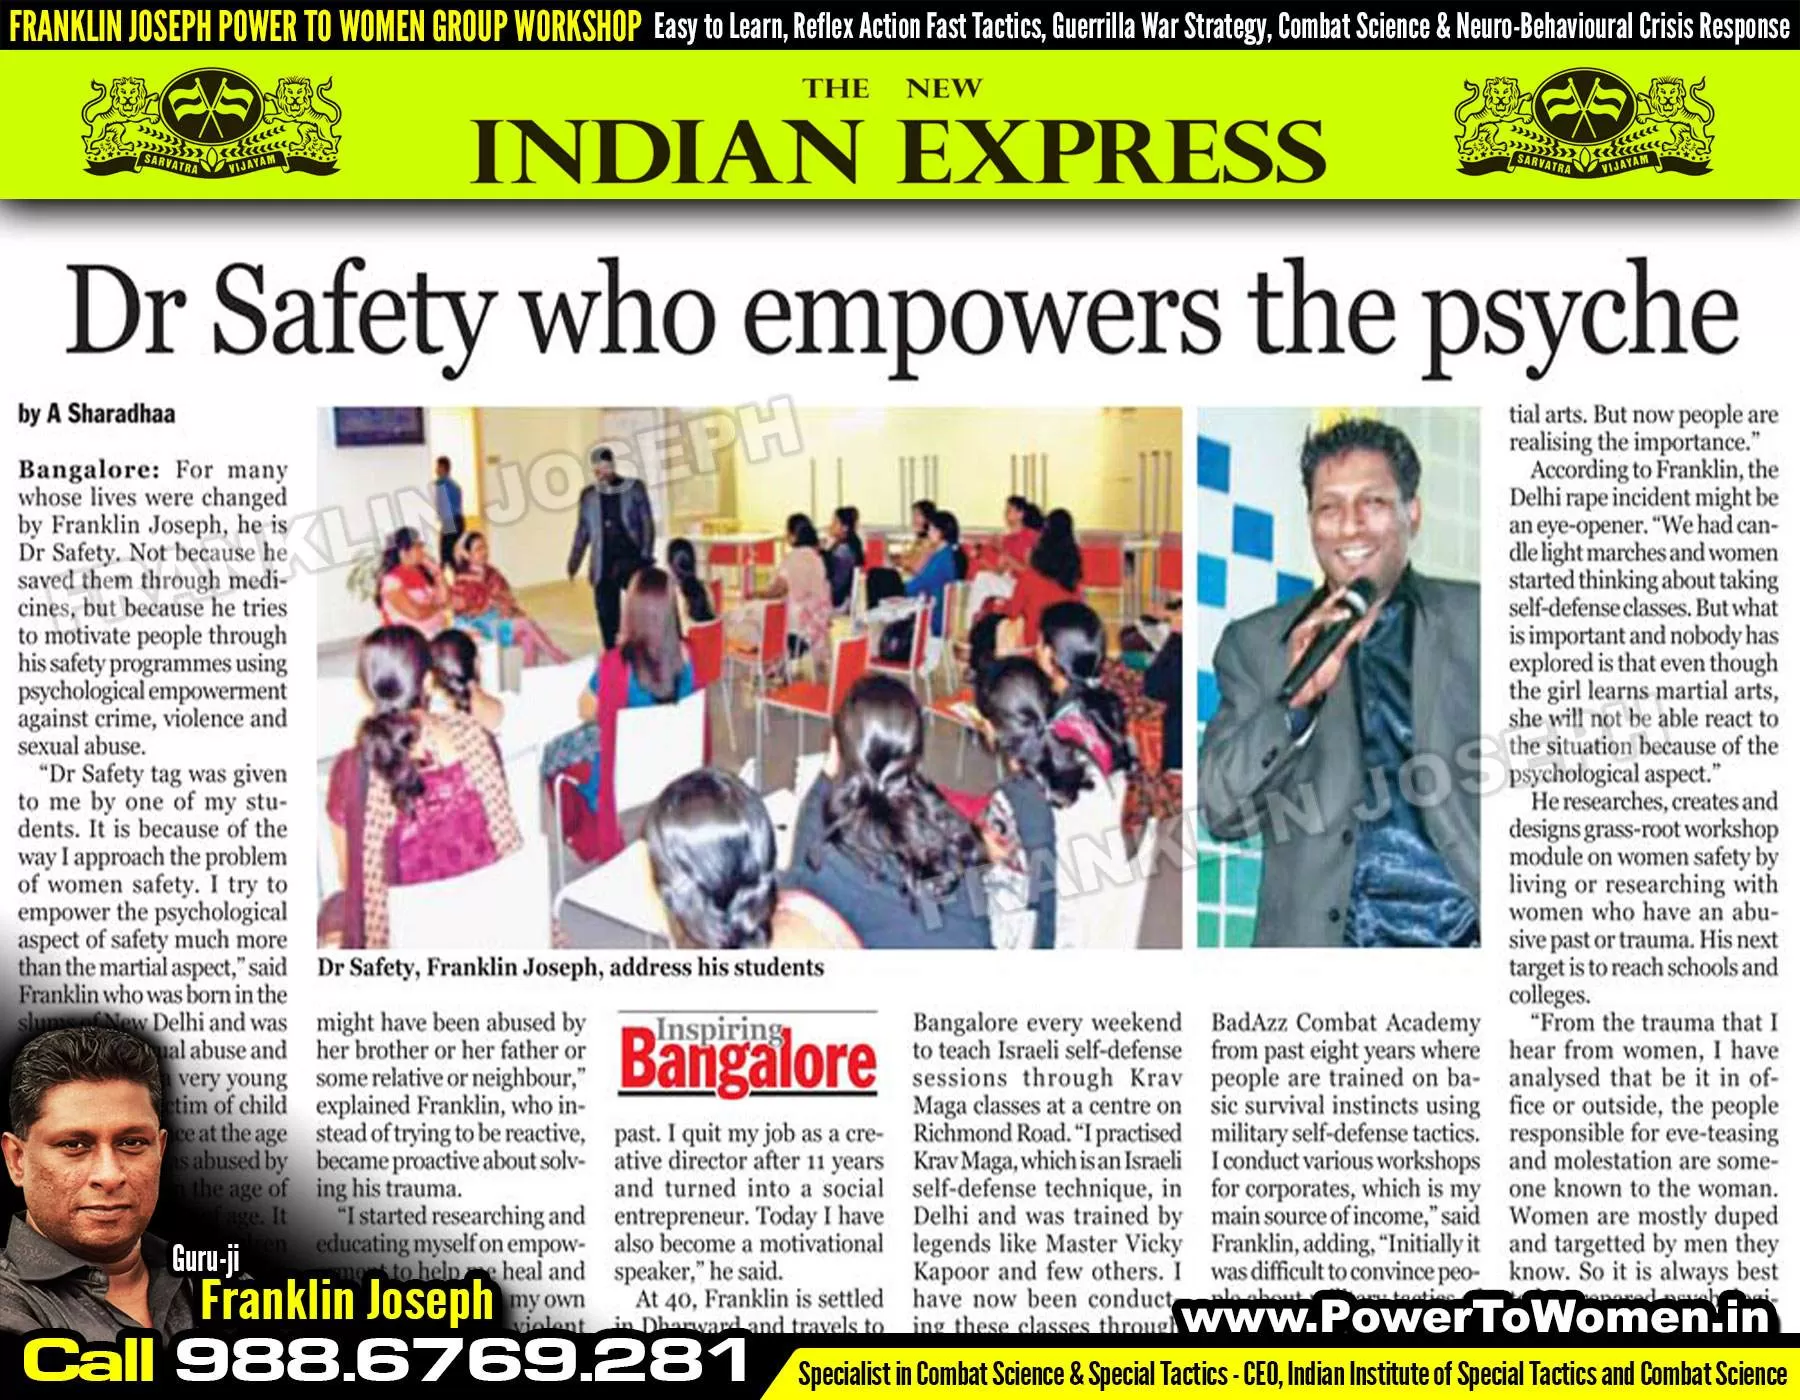 The New Indian Express Newspaper - Dr. Safety who empowers the psyche - Franklin Joseph Feature Article